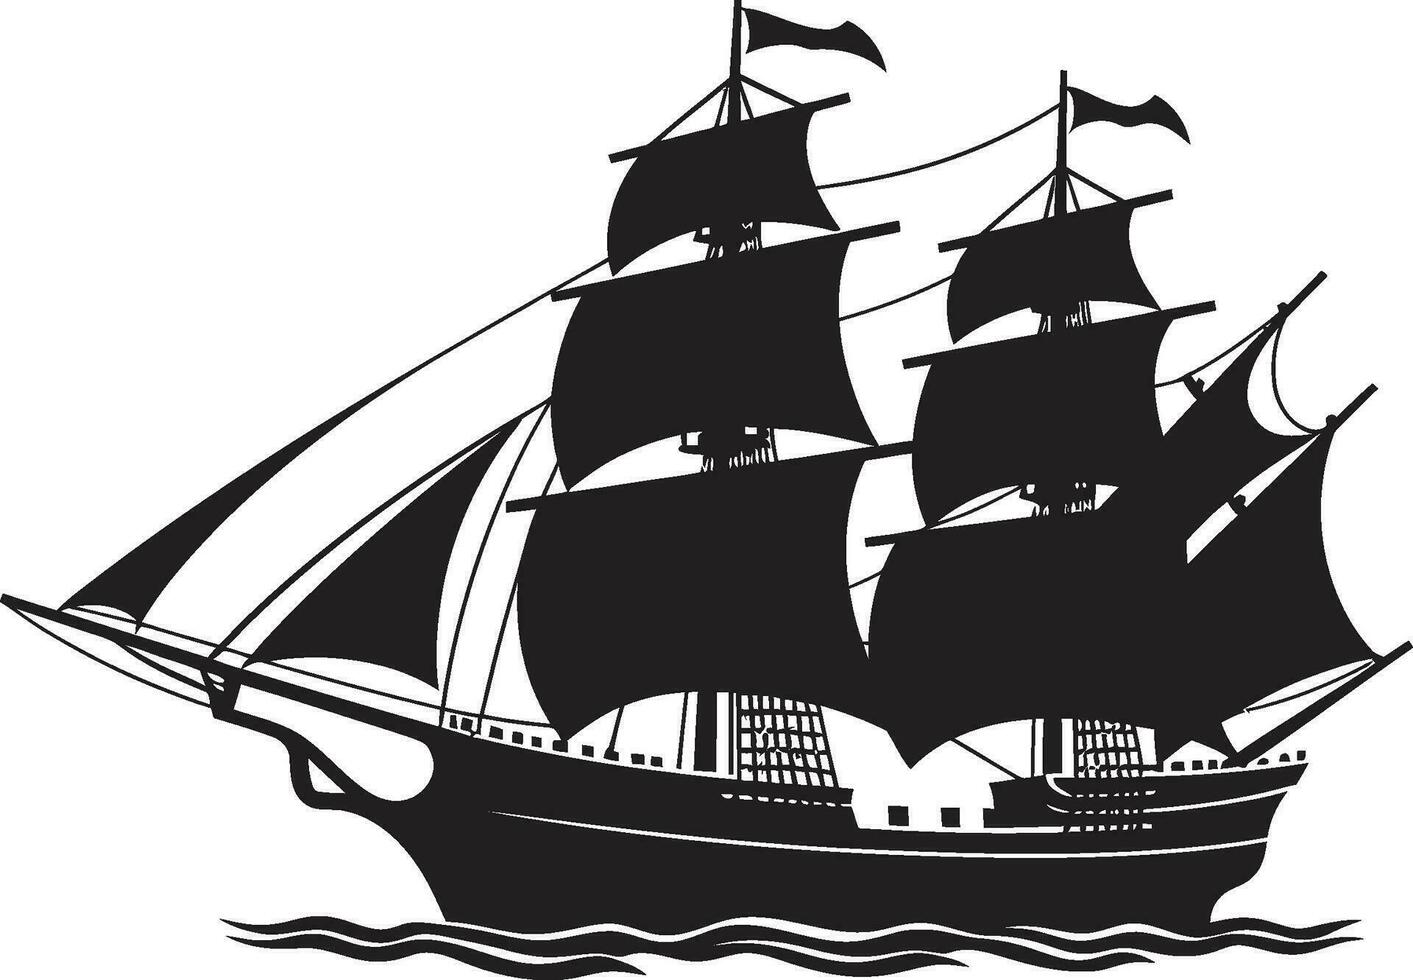 Timeless Odyssey Ancient Ship Icon in Black Ancient Navigator Vector Ship Emblem